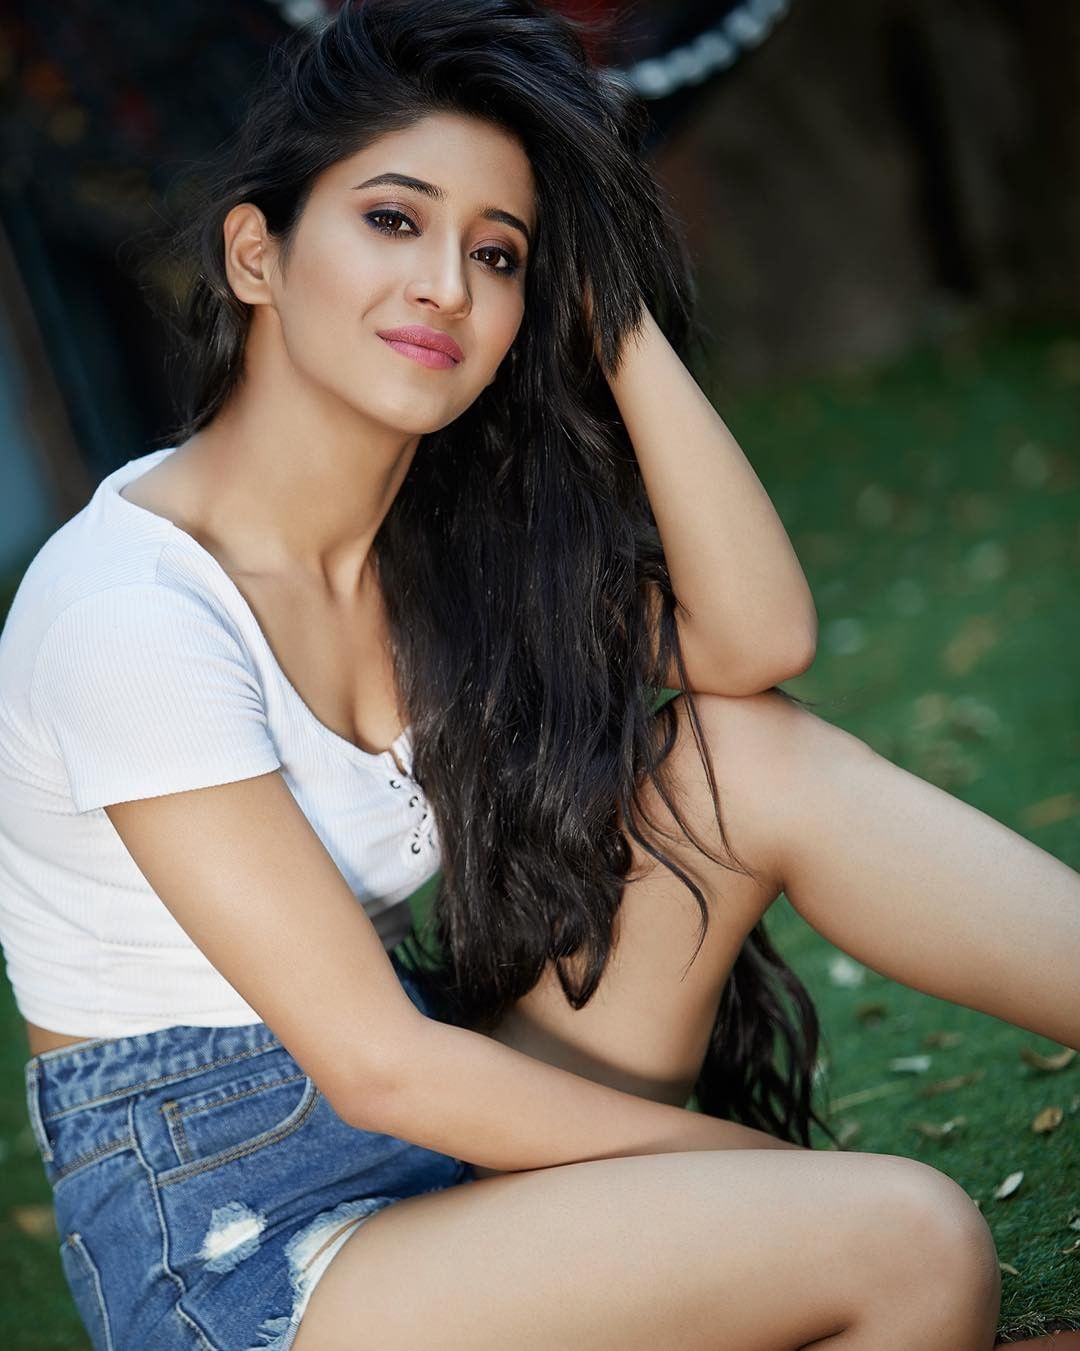 Steal The Girl-Next-Door Vibe From Shivangi Joshi’s Casual Style! 1